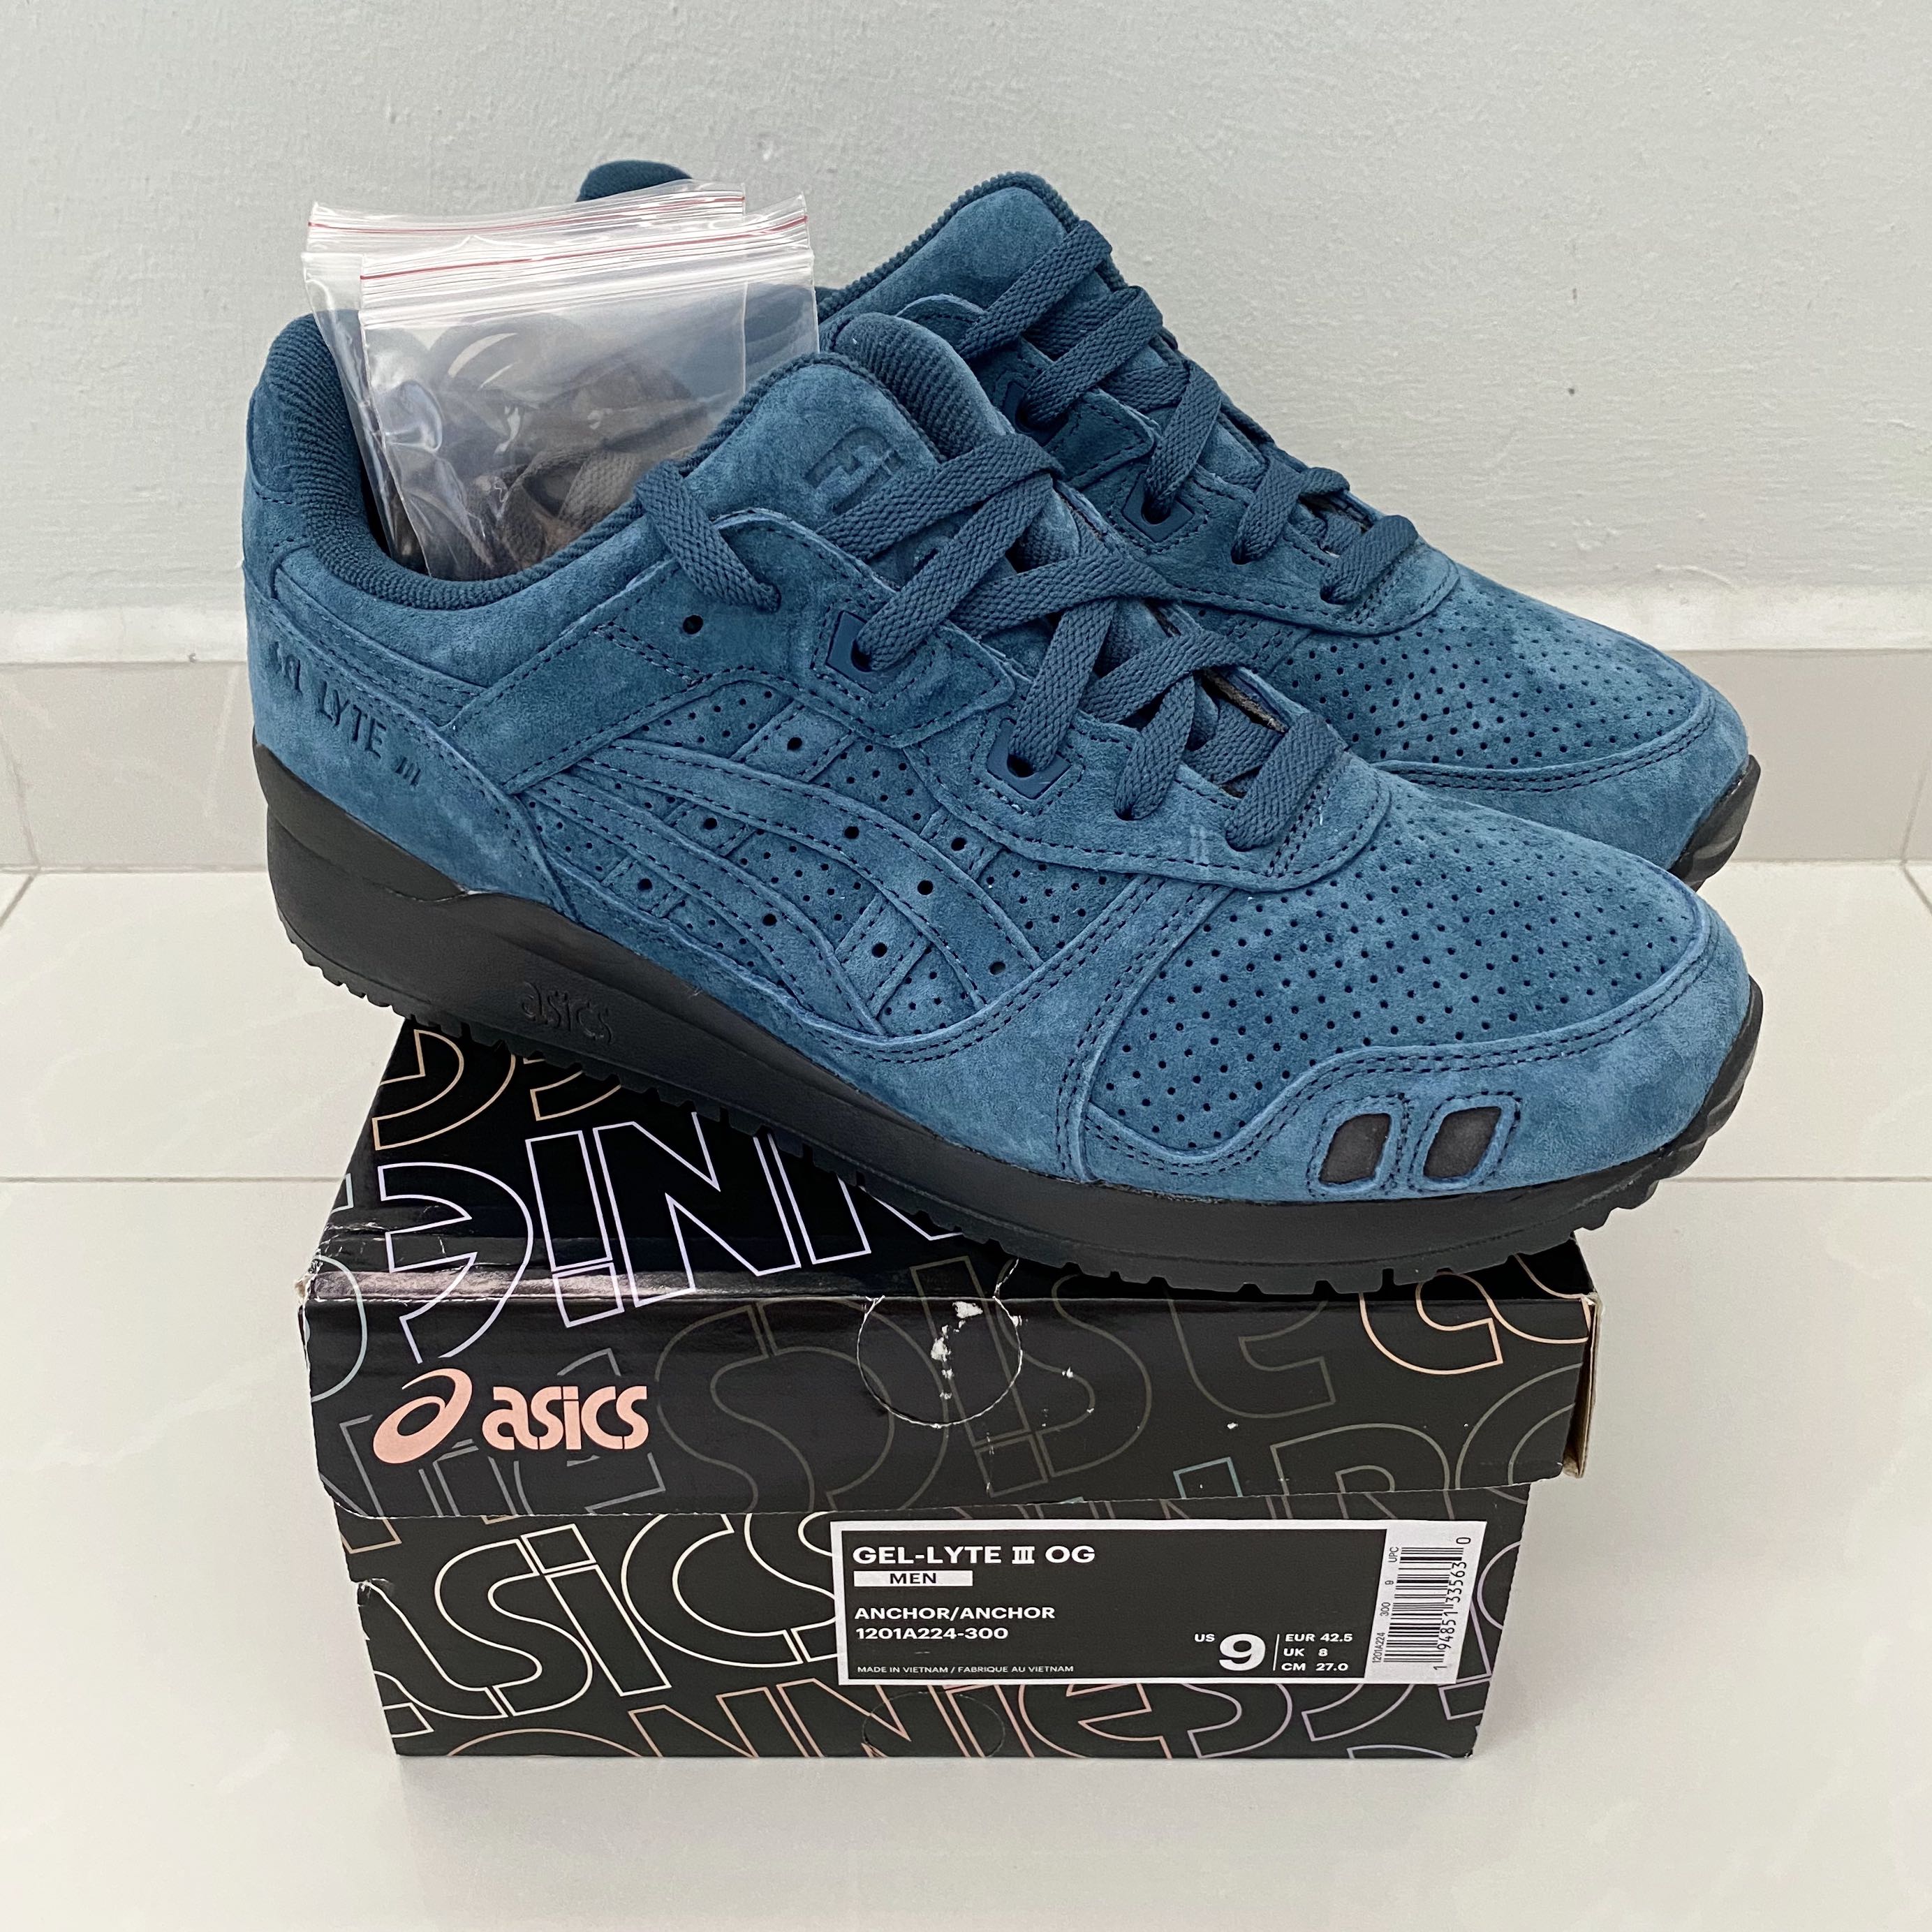 Ronnie Fieg x Asics Gel Lyte III The Palette 'Anchor', Men's Fashion,  Footwear, Sneakers on Carousell